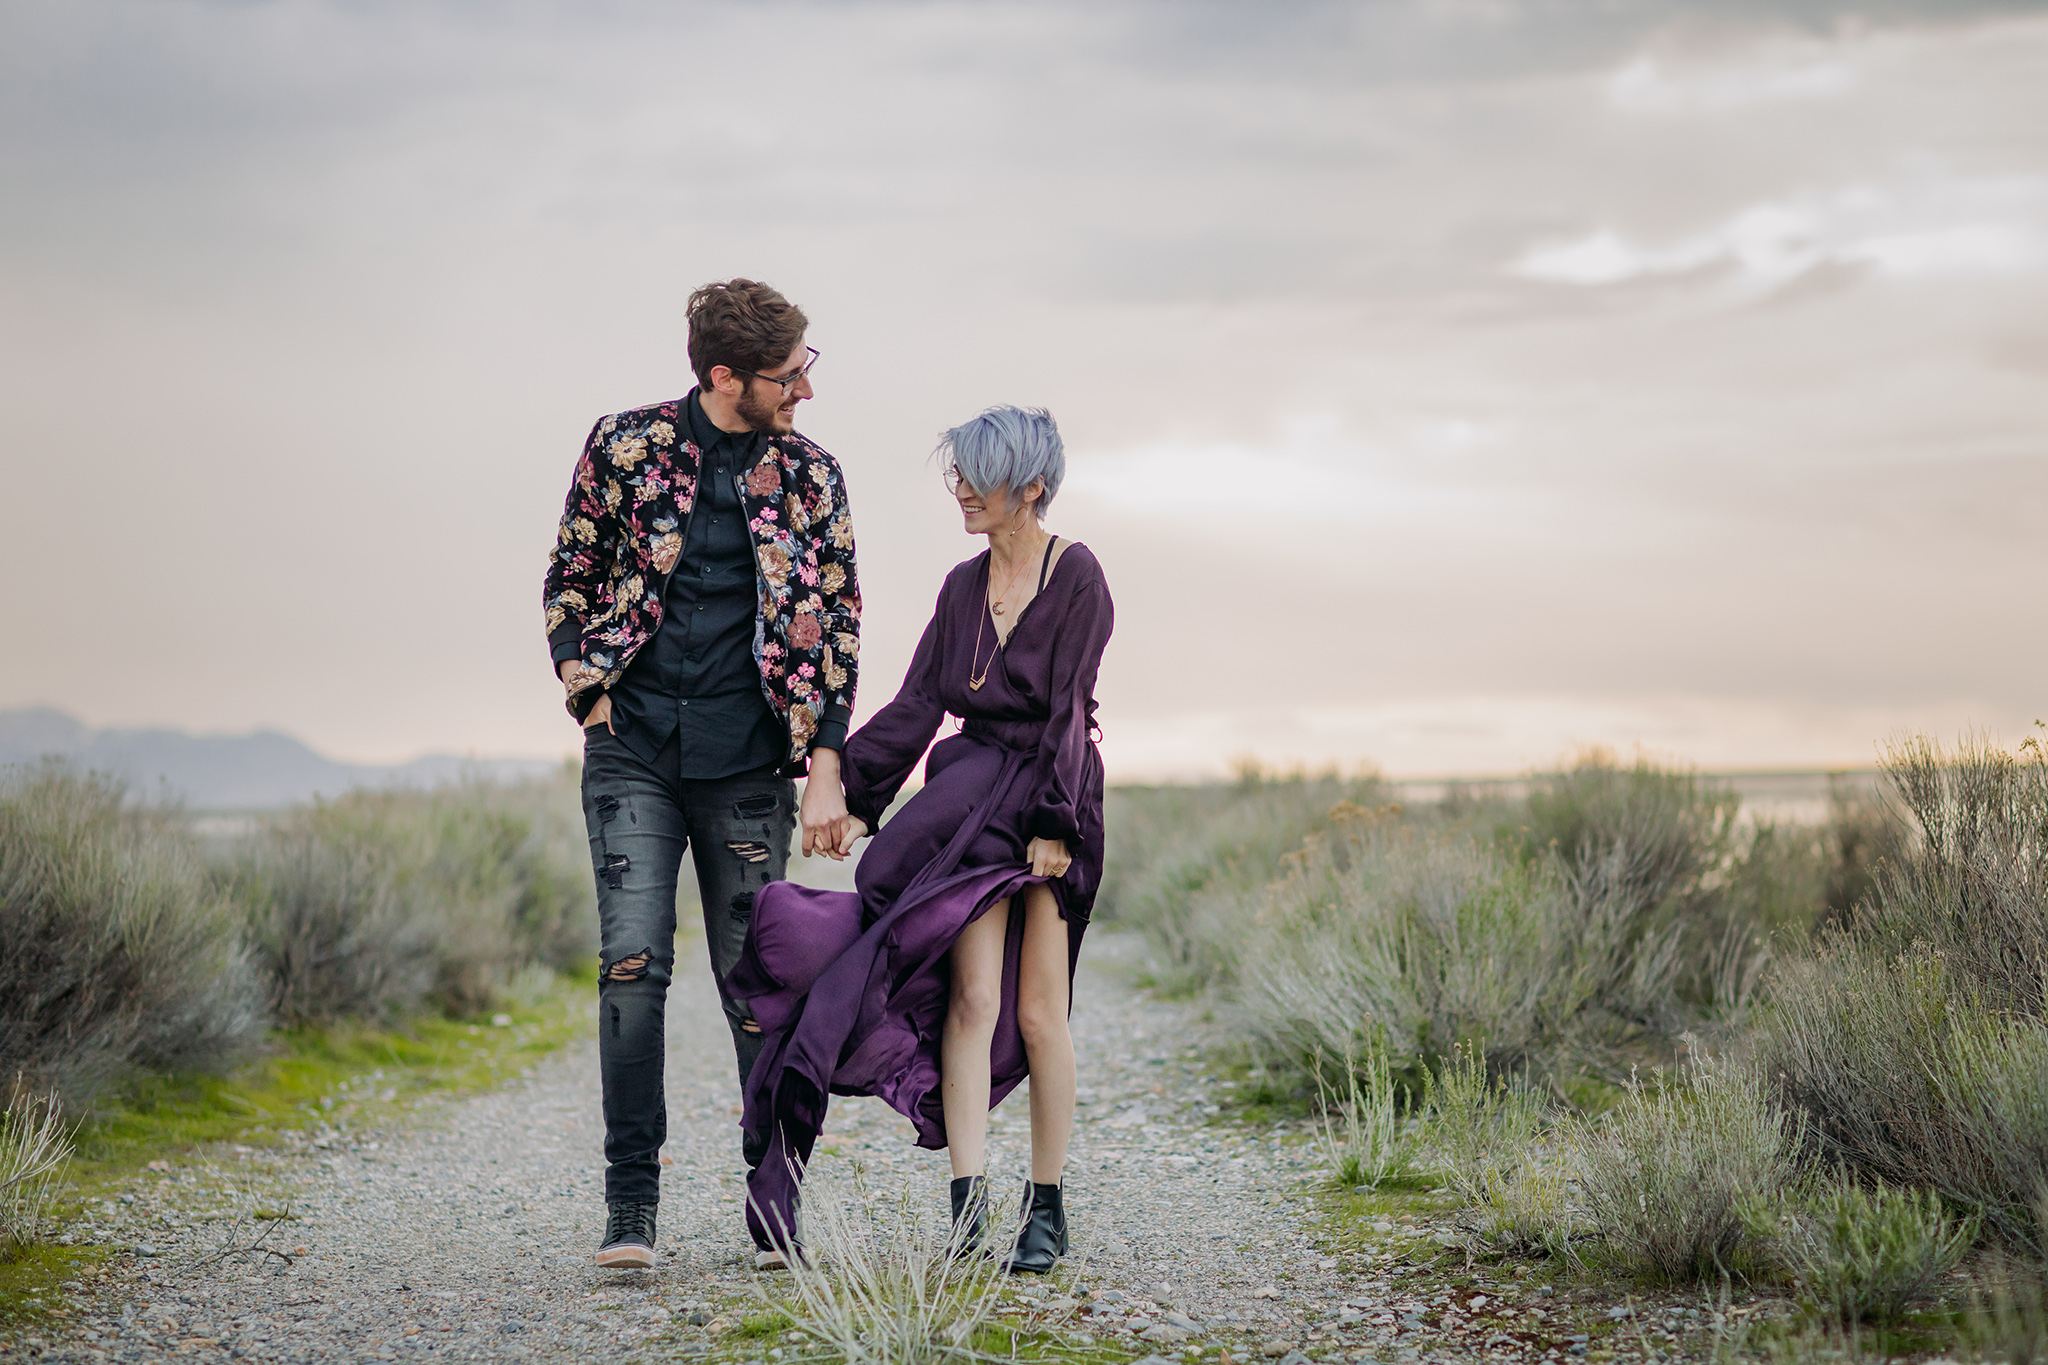 Great Saltair engagement couples photos on a stormy evening near Salt Lake City Utah Stylish couple with outfits inspiration for engagement photos by ENV Photography